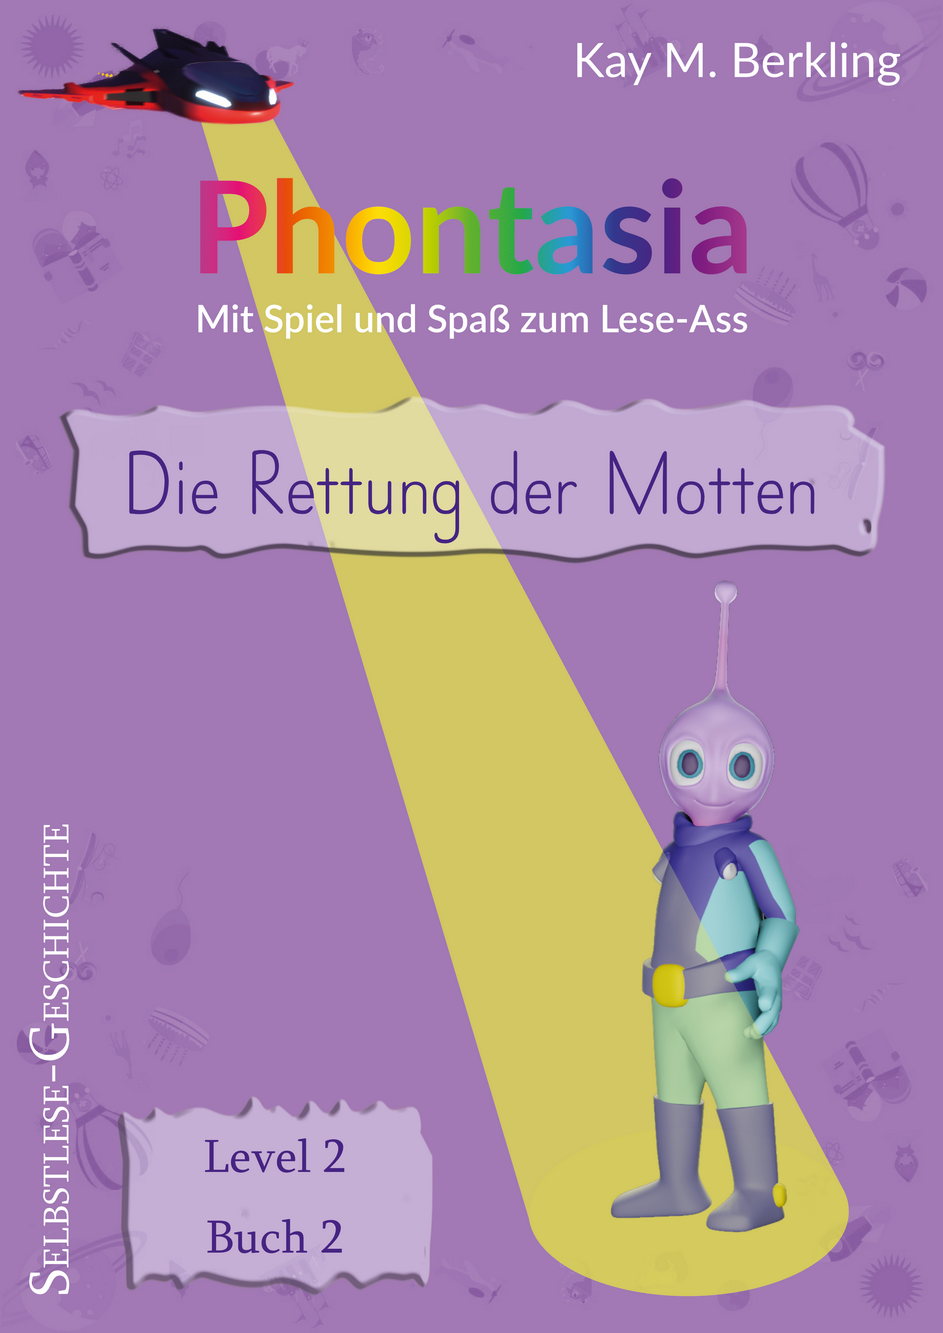 Phontasia: Cover Selbstlese-Geschichte Level 2.2